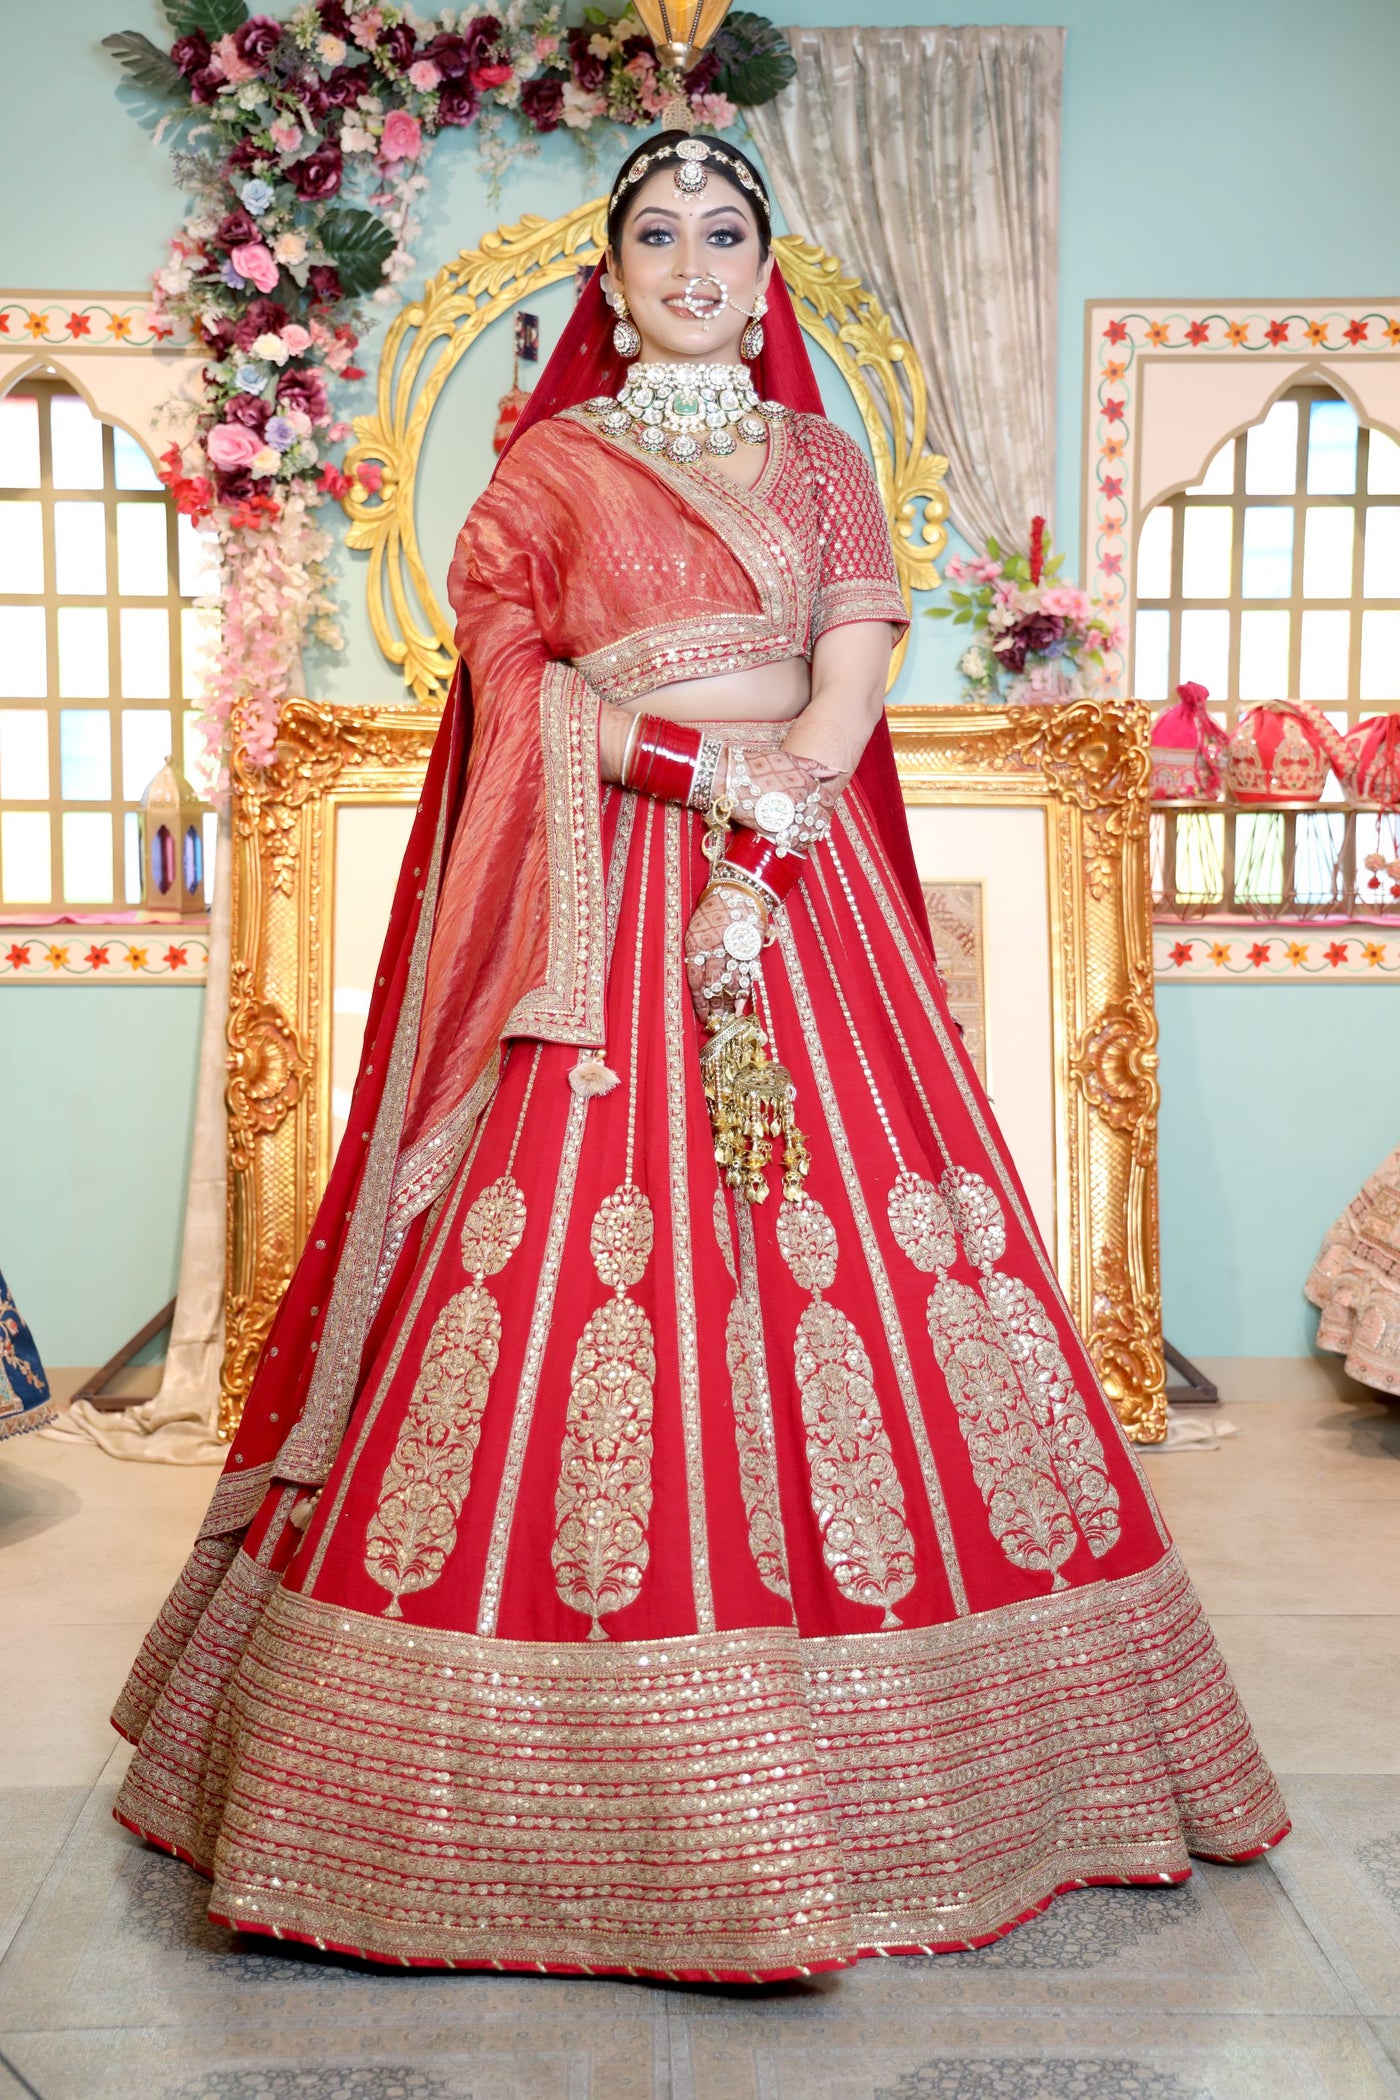 2-red-and-gold-brocade-peplum-long-blouse-over-a-plan-red-lehenga-with-a-net-red-supatta  - Witty Vows